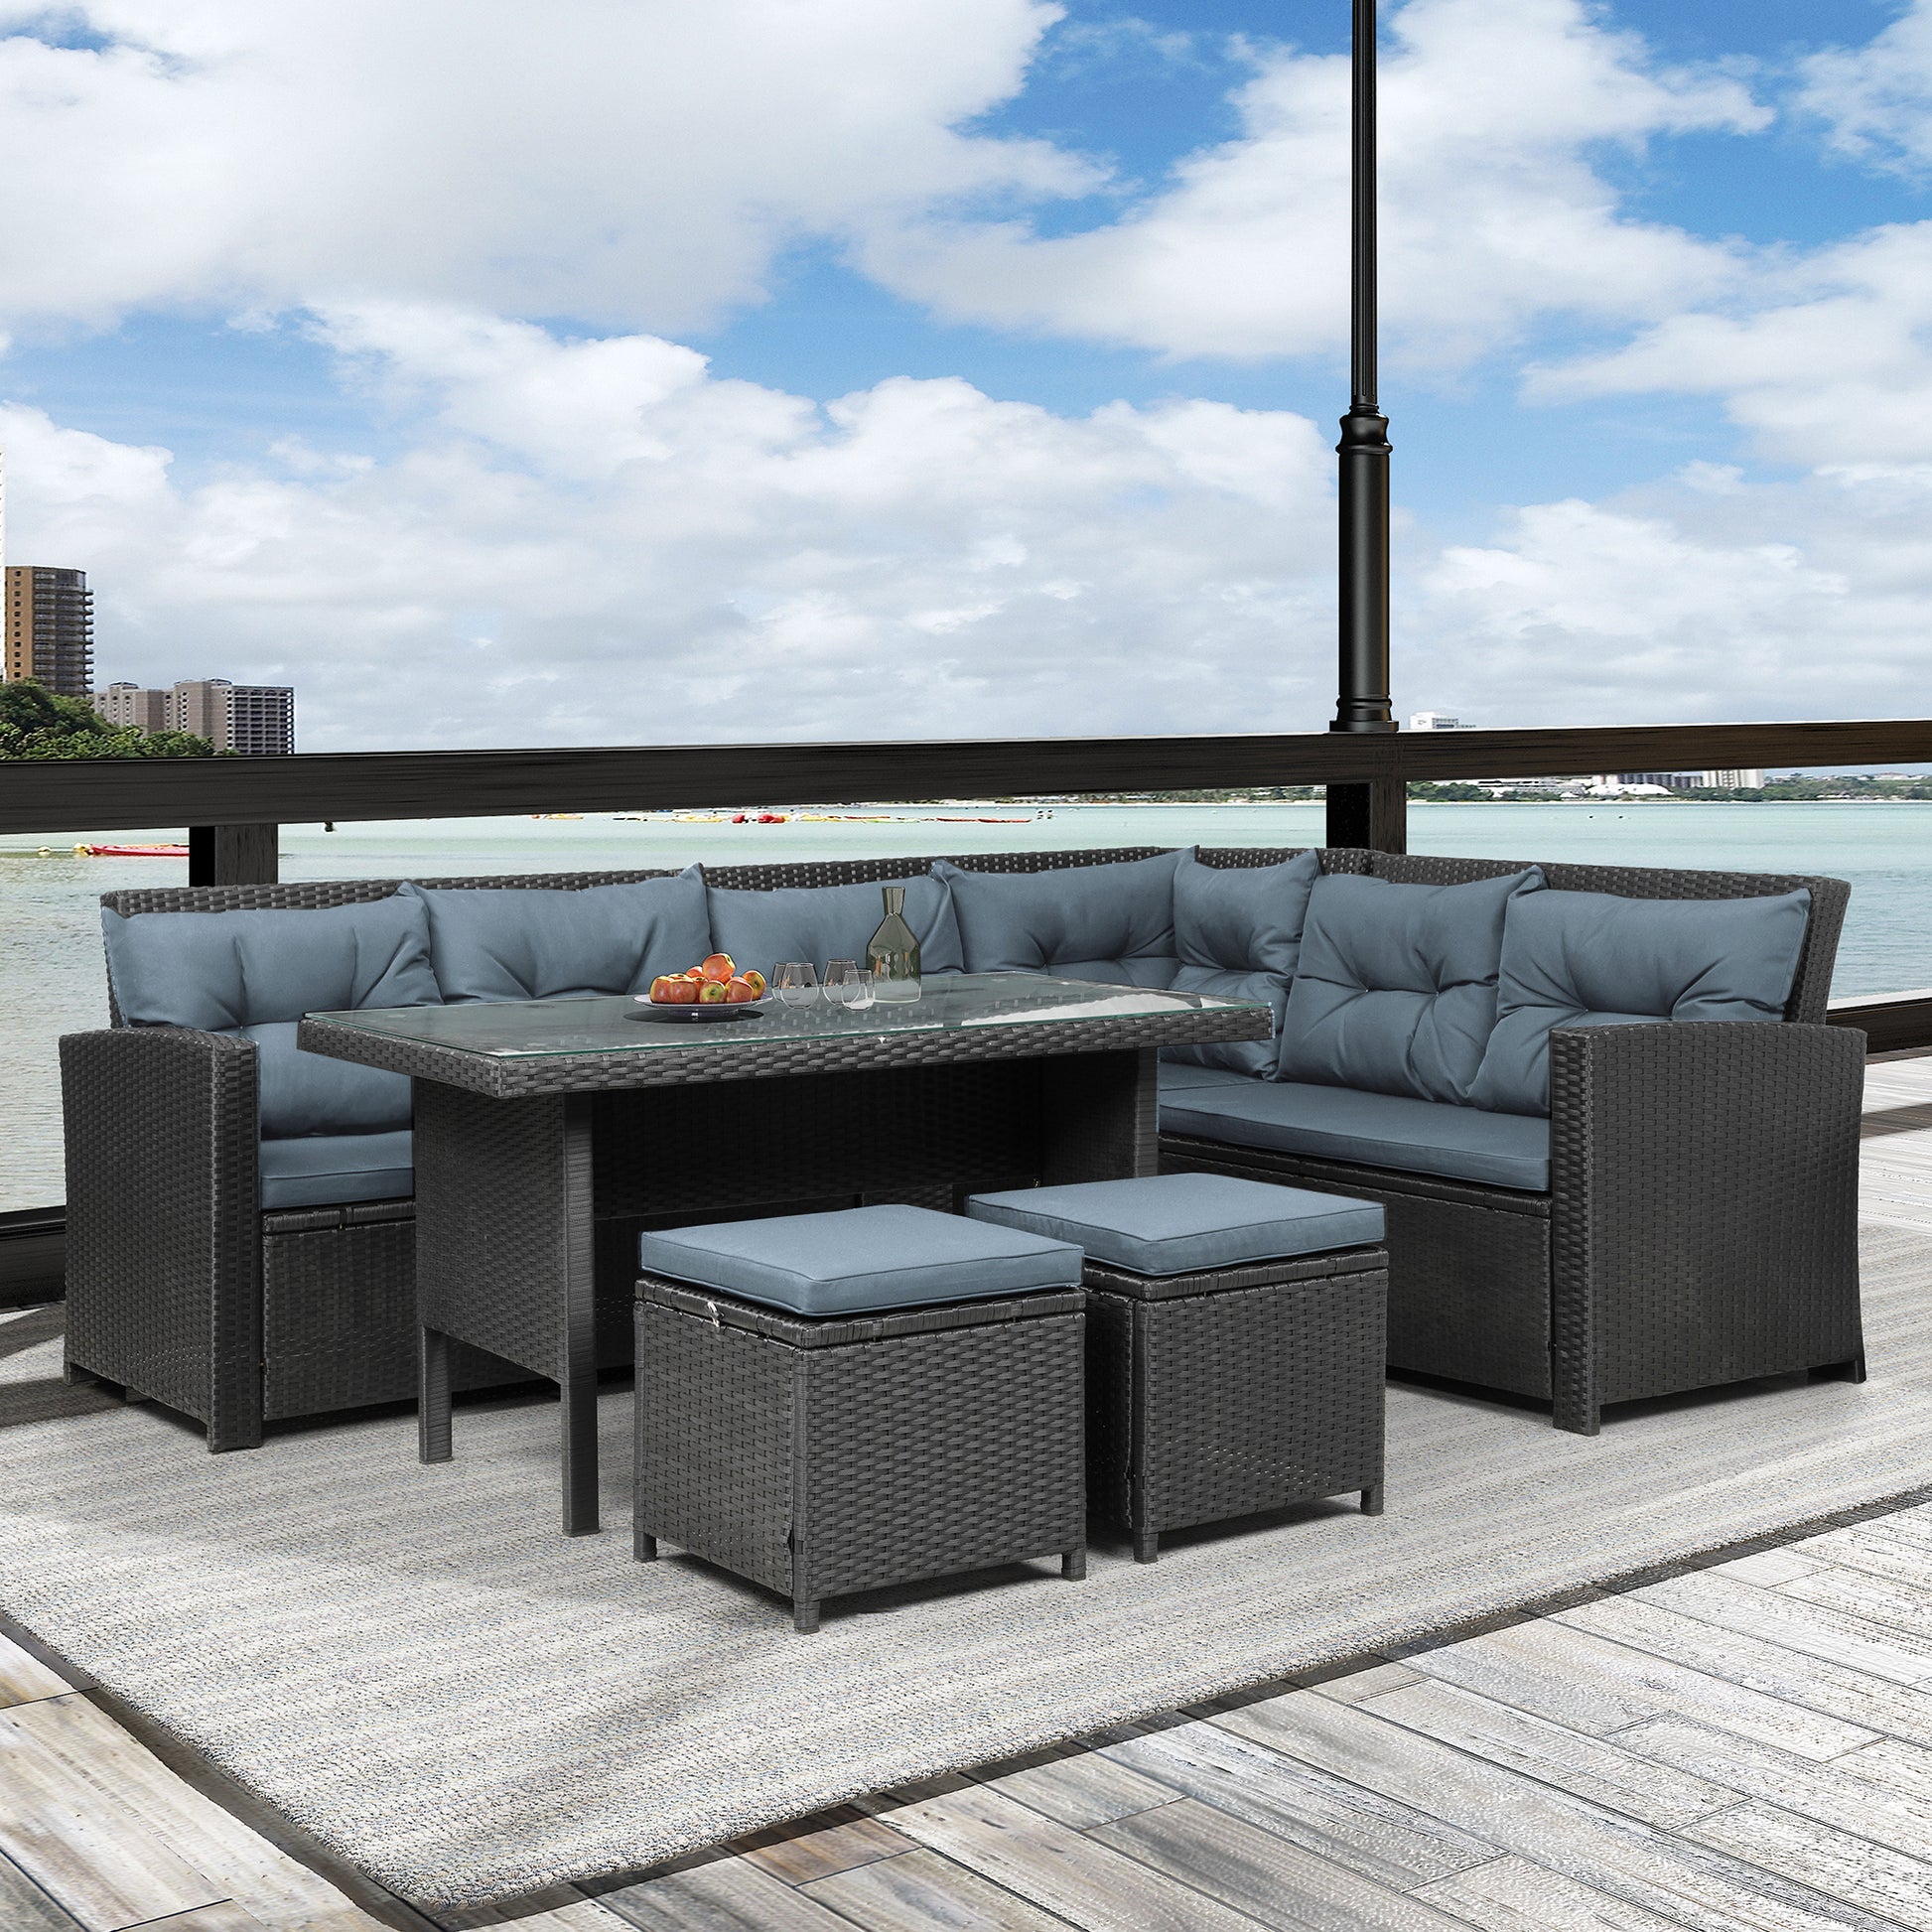 6PC Outdoor Sectional Dining Set Black